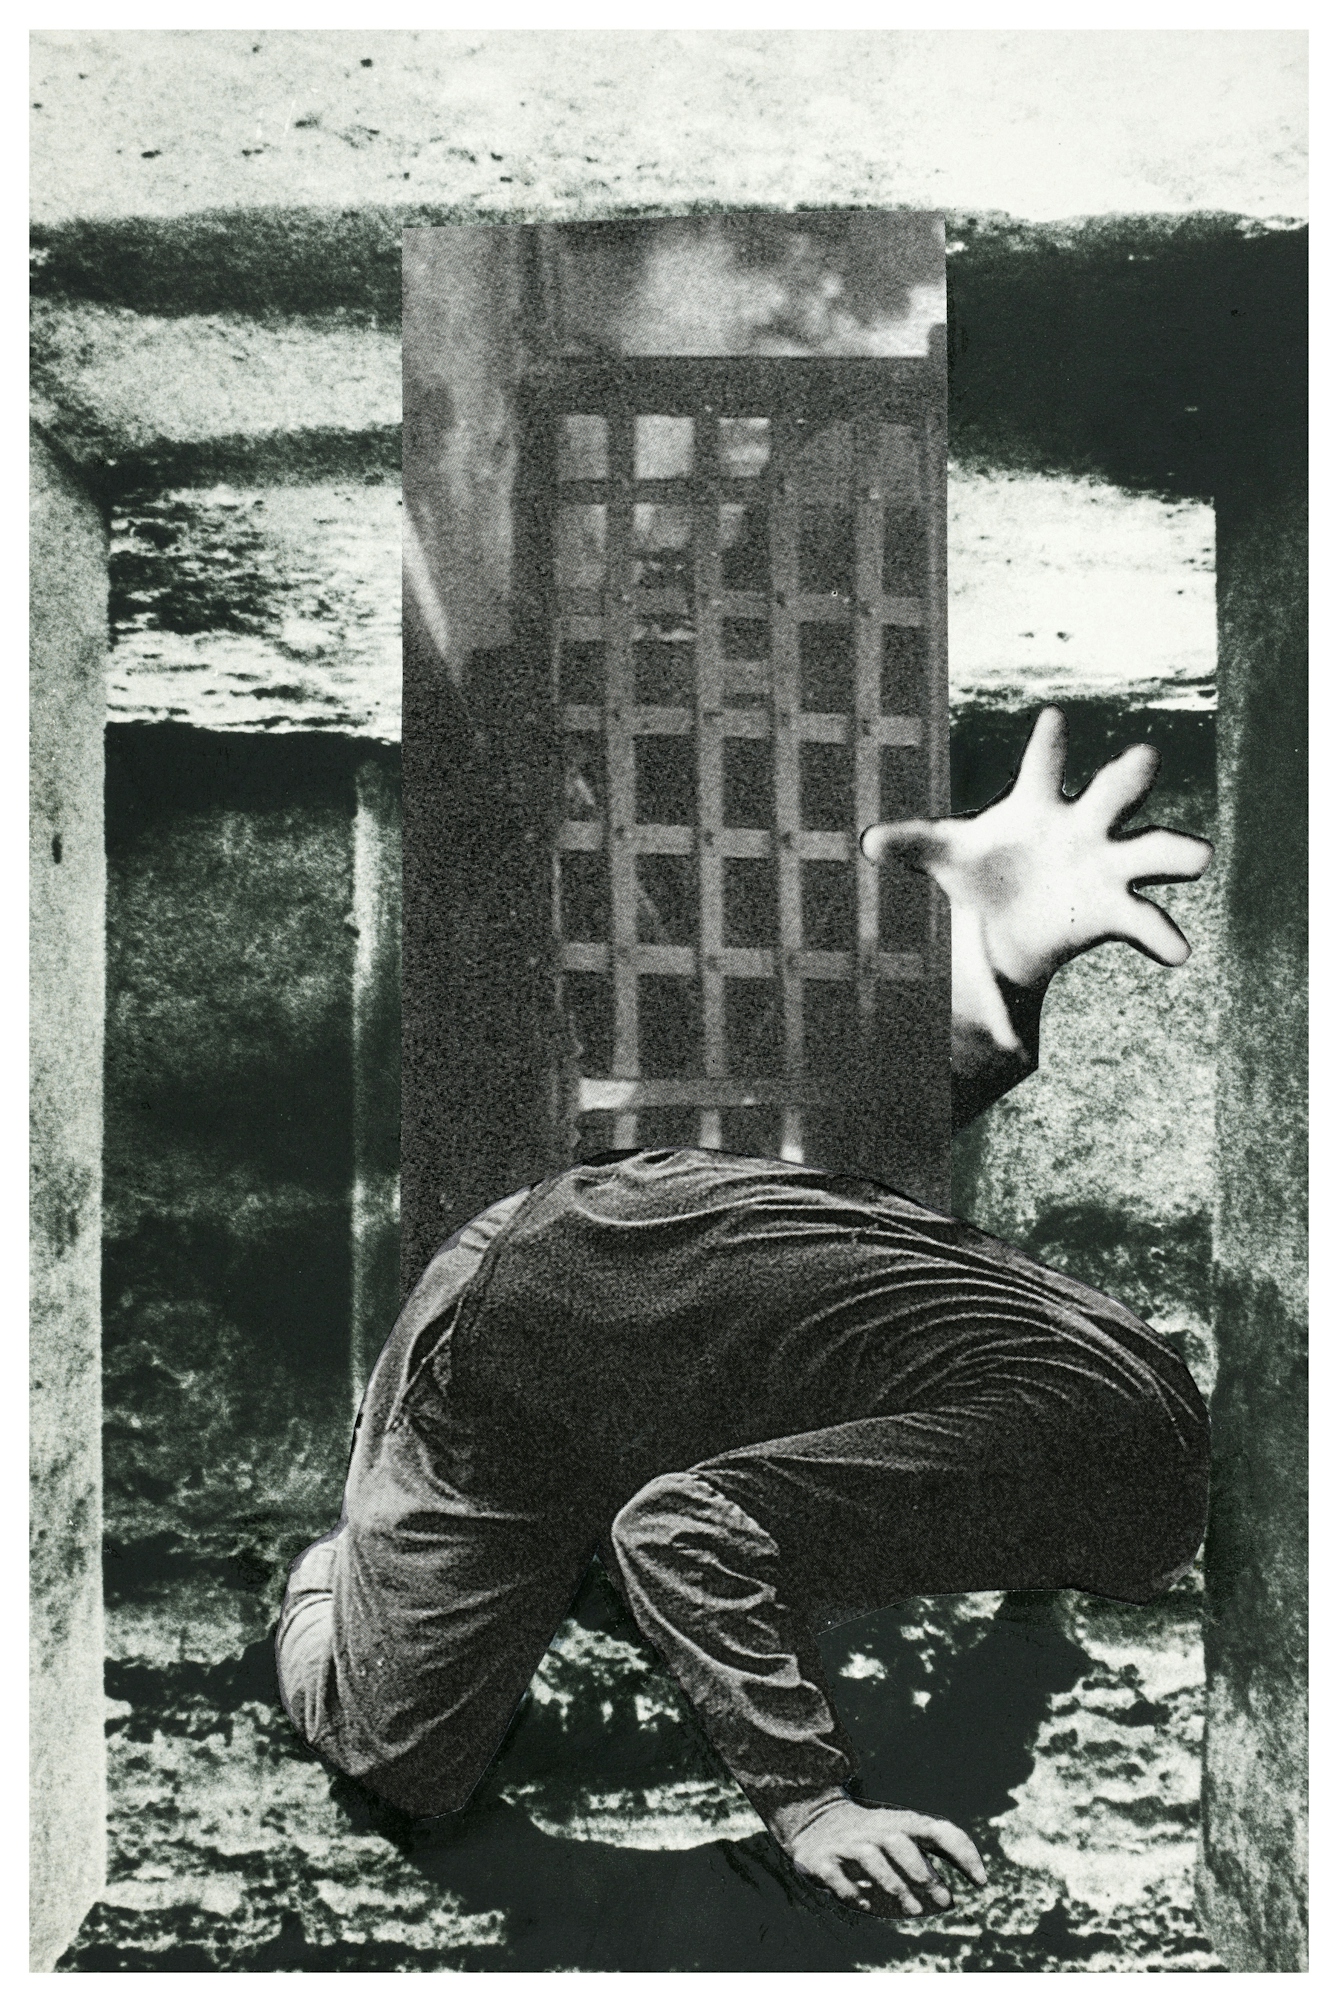 Photographic collage using images cut out from magazines and books. The scene depicts a man's torso on hands and knees as if searching for something. His head is hidden behind a stone wall. Behind him is gridded iron door like in a castle prison. From behind the door a hand is reaching out, fingers spread, towards the viewer. The background of the scene is made up of fragments of stone walls and ceilings. The overall tones of the collage are monotone, blacks, whites and greys.